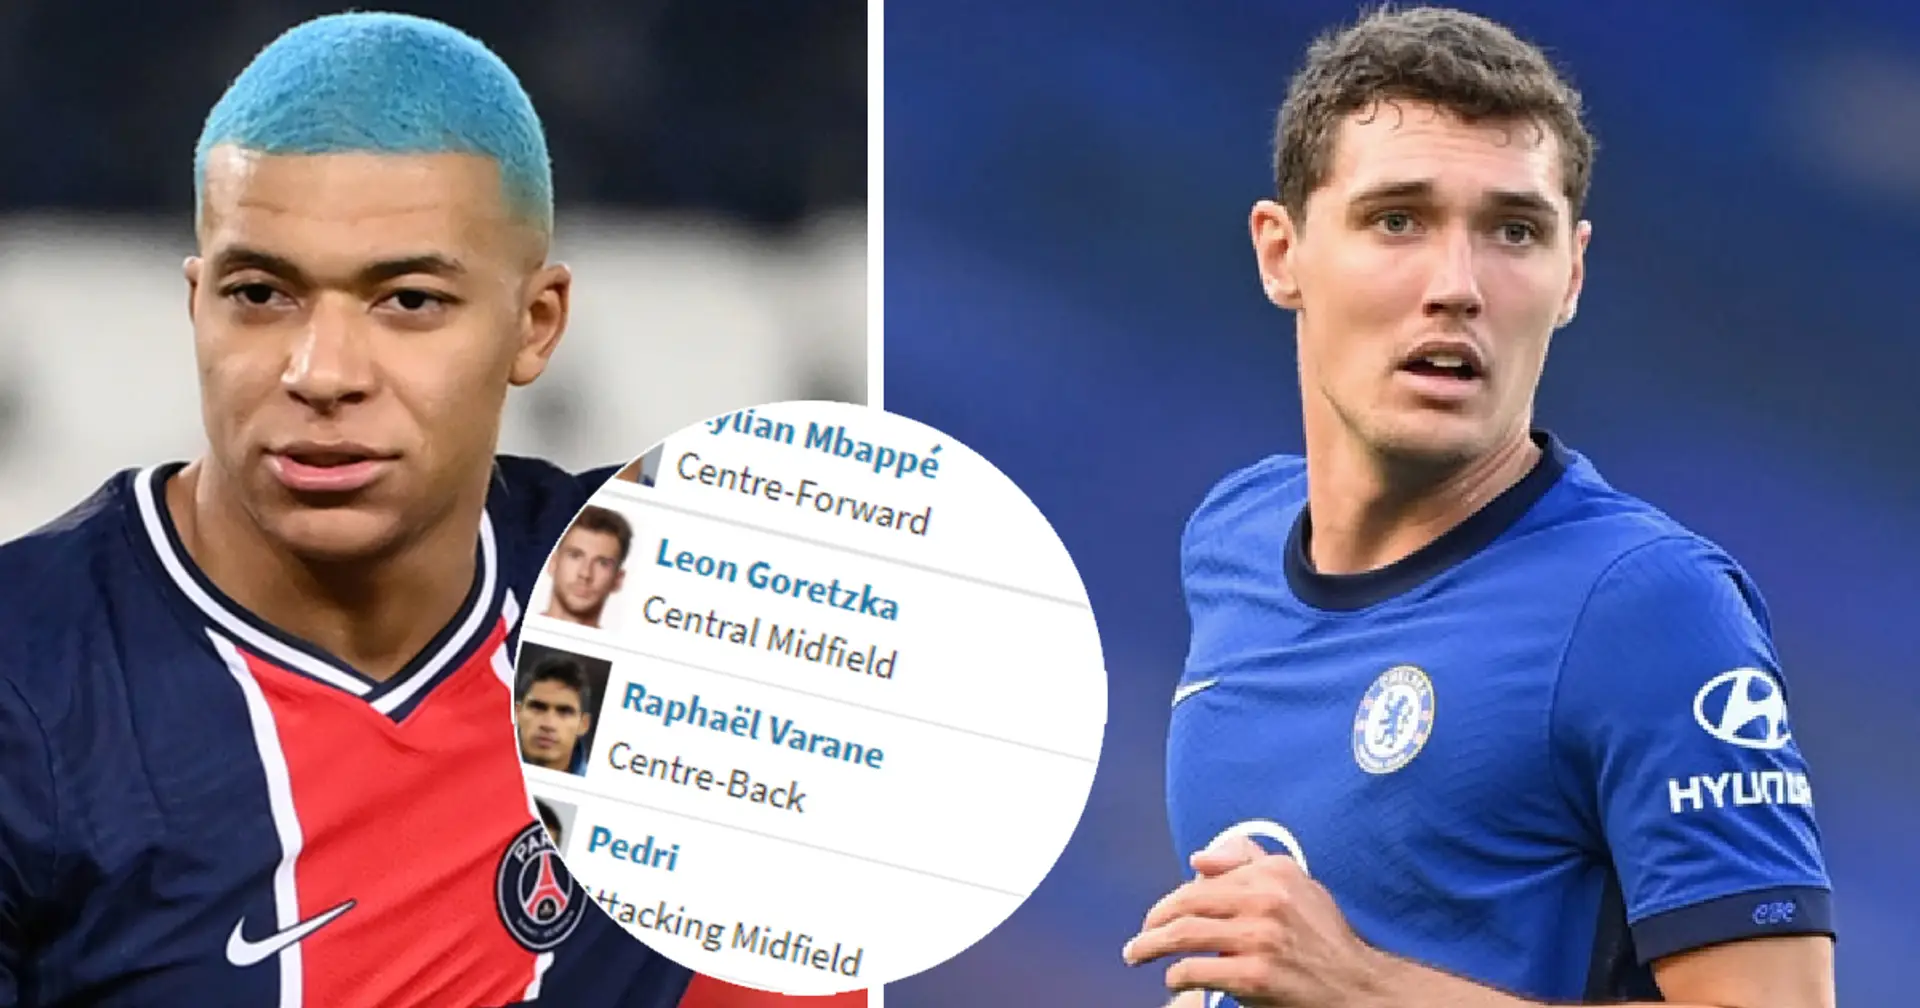 Mbappe, Ronaldo & 2 Chelsea stars among most valuable players whose contracts expire in 2022